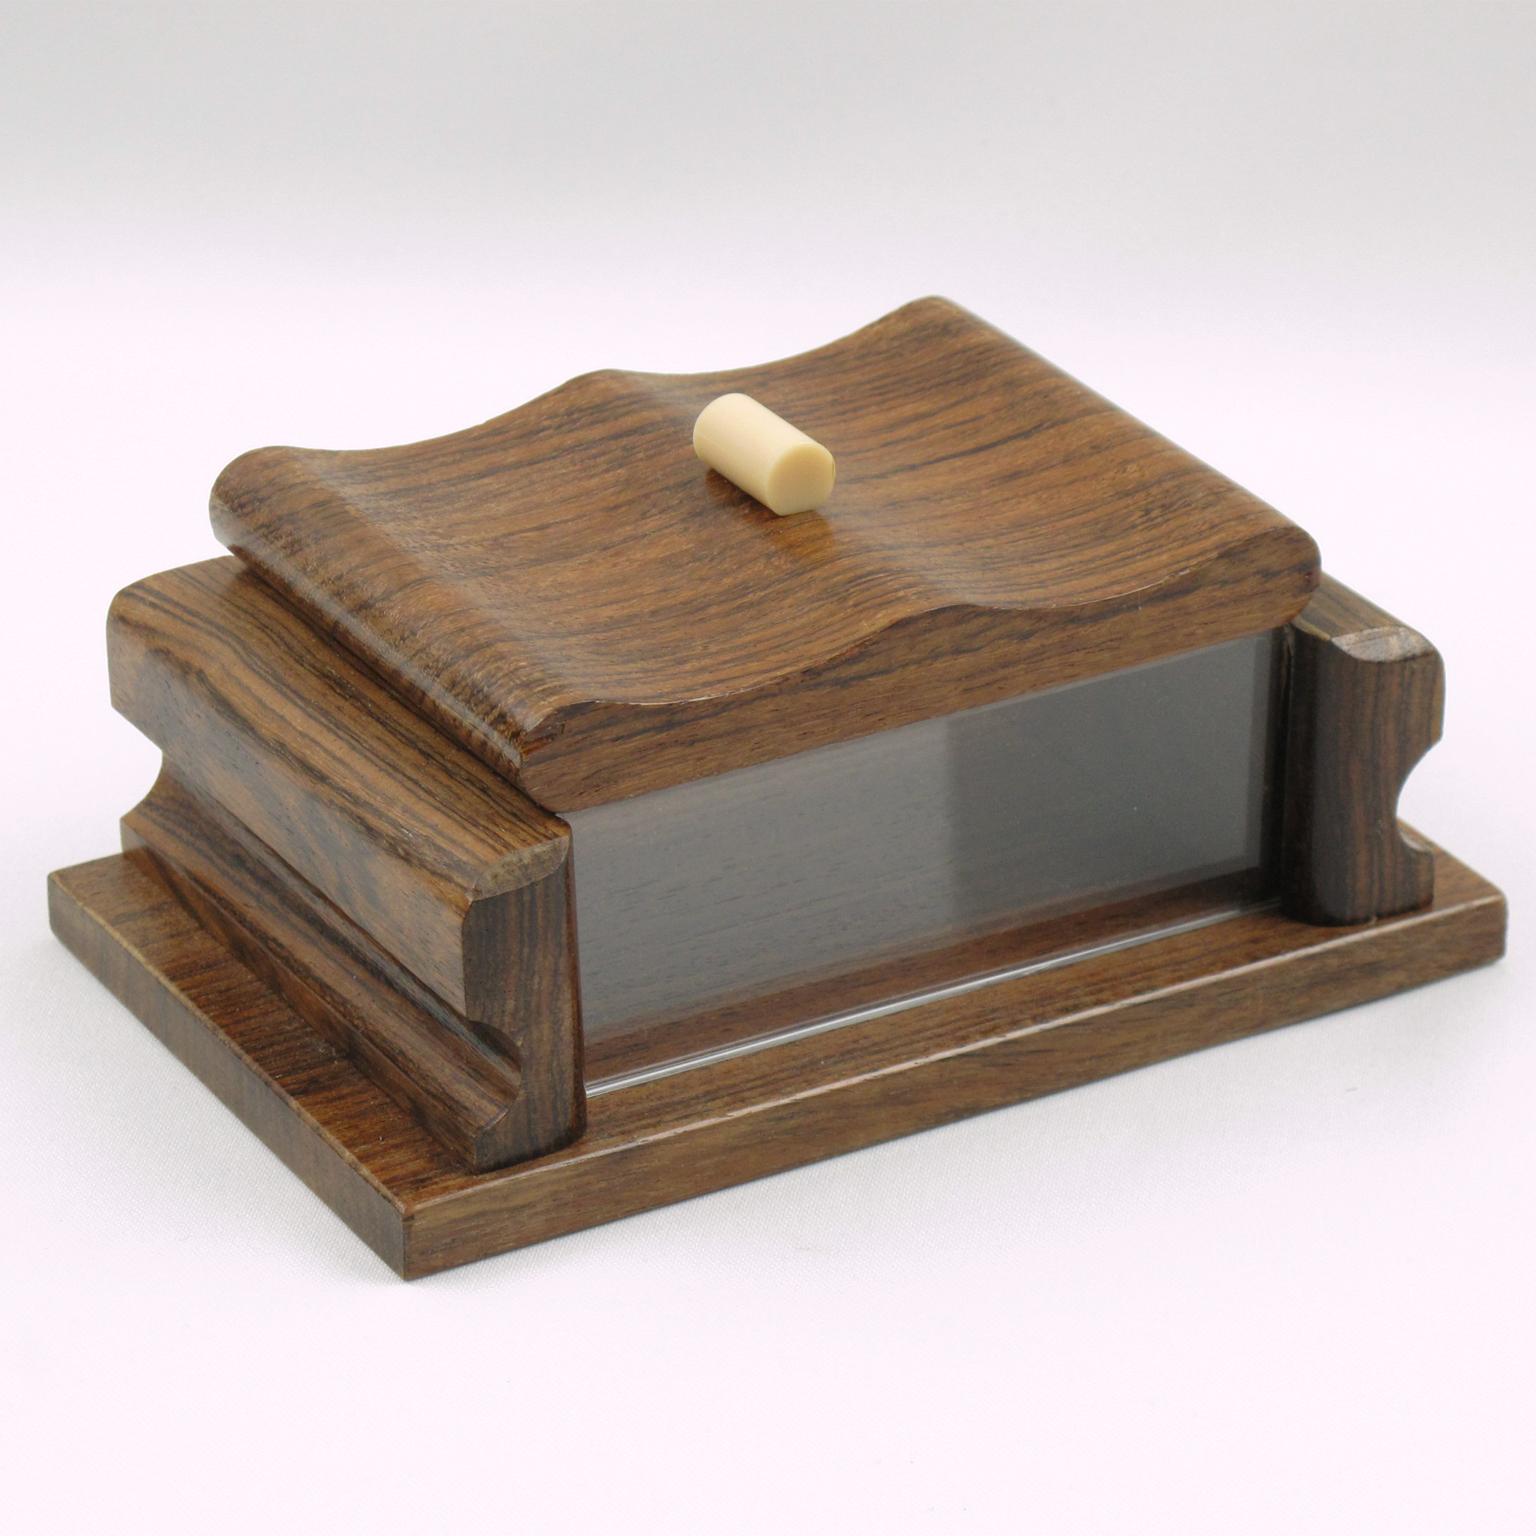 Art Deco Wood and Lucite Box, France 1940s For Sale 2